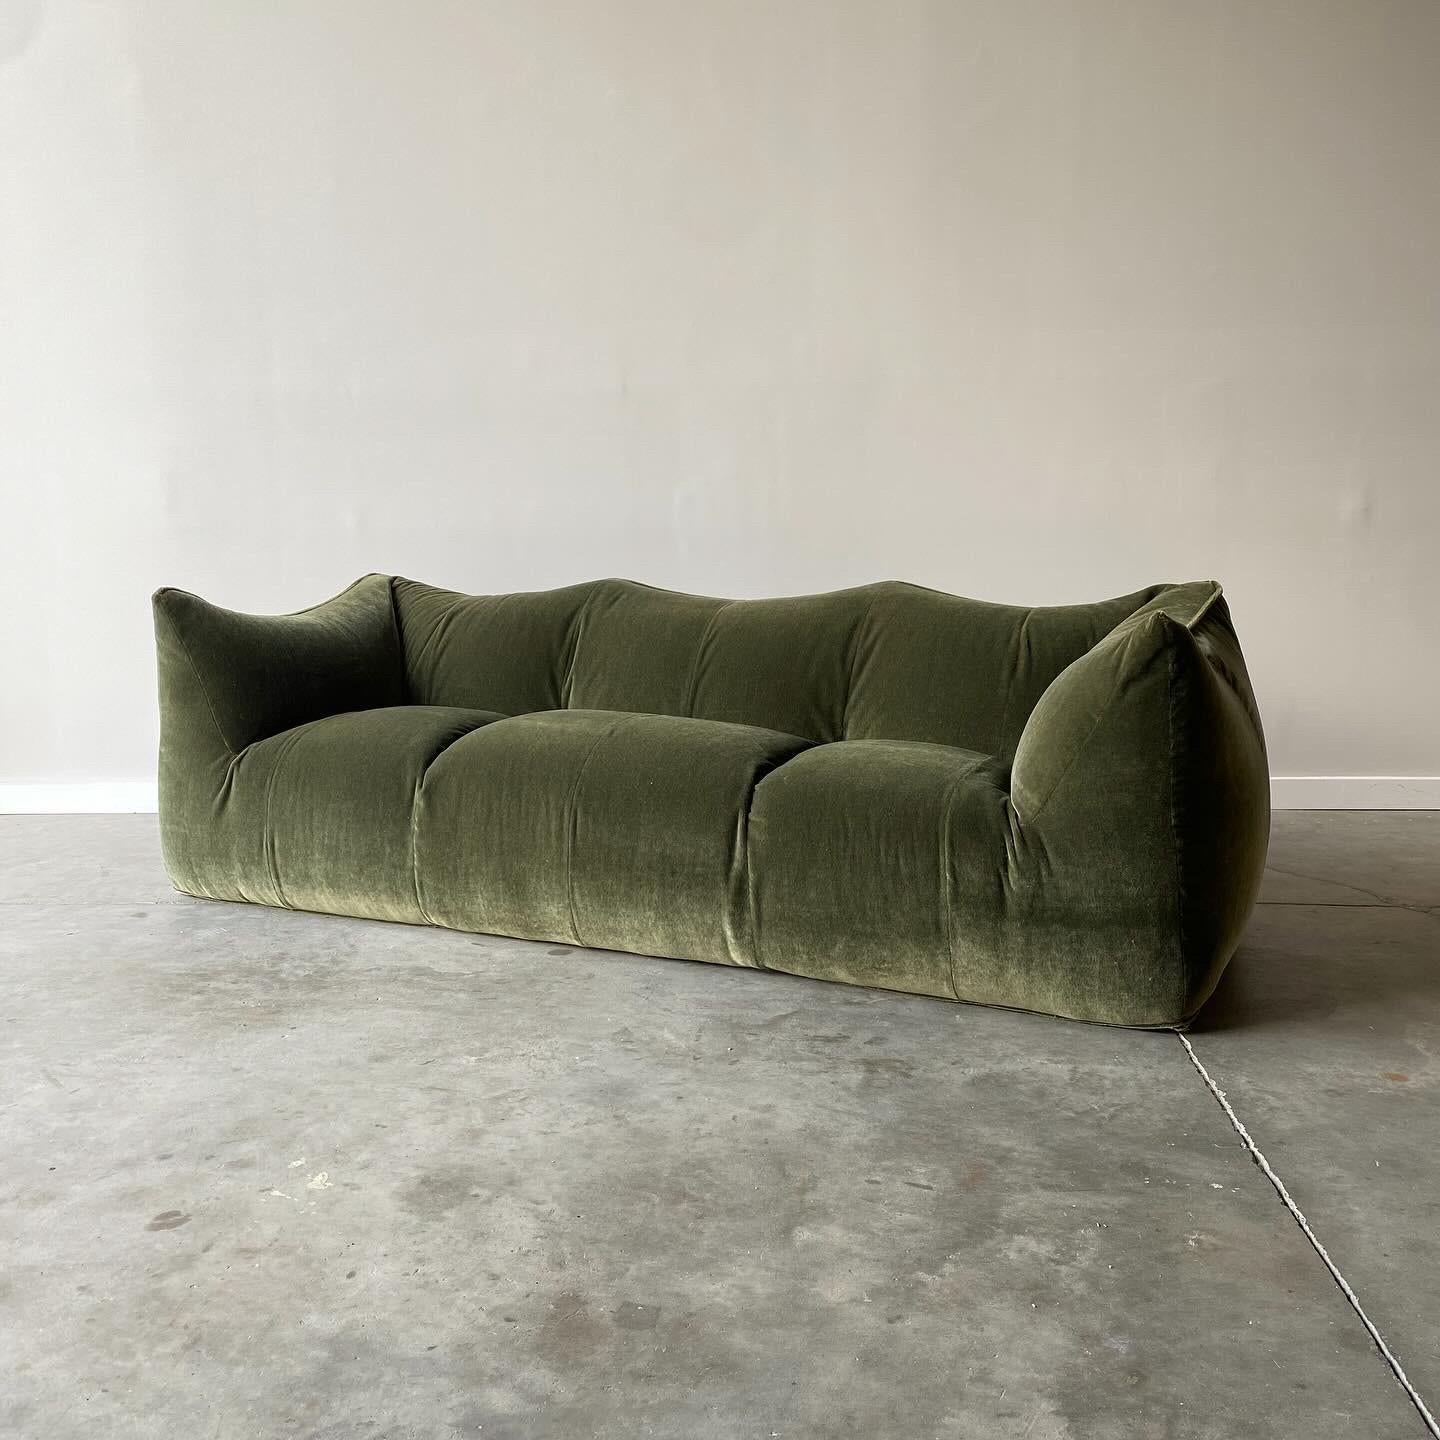 1970s Mario Bellini Le Bambole Sofa, Newly Upholstered in Mohair, B&B Italia

An icon newly restored.  Lush dusty green mohair over original form.  